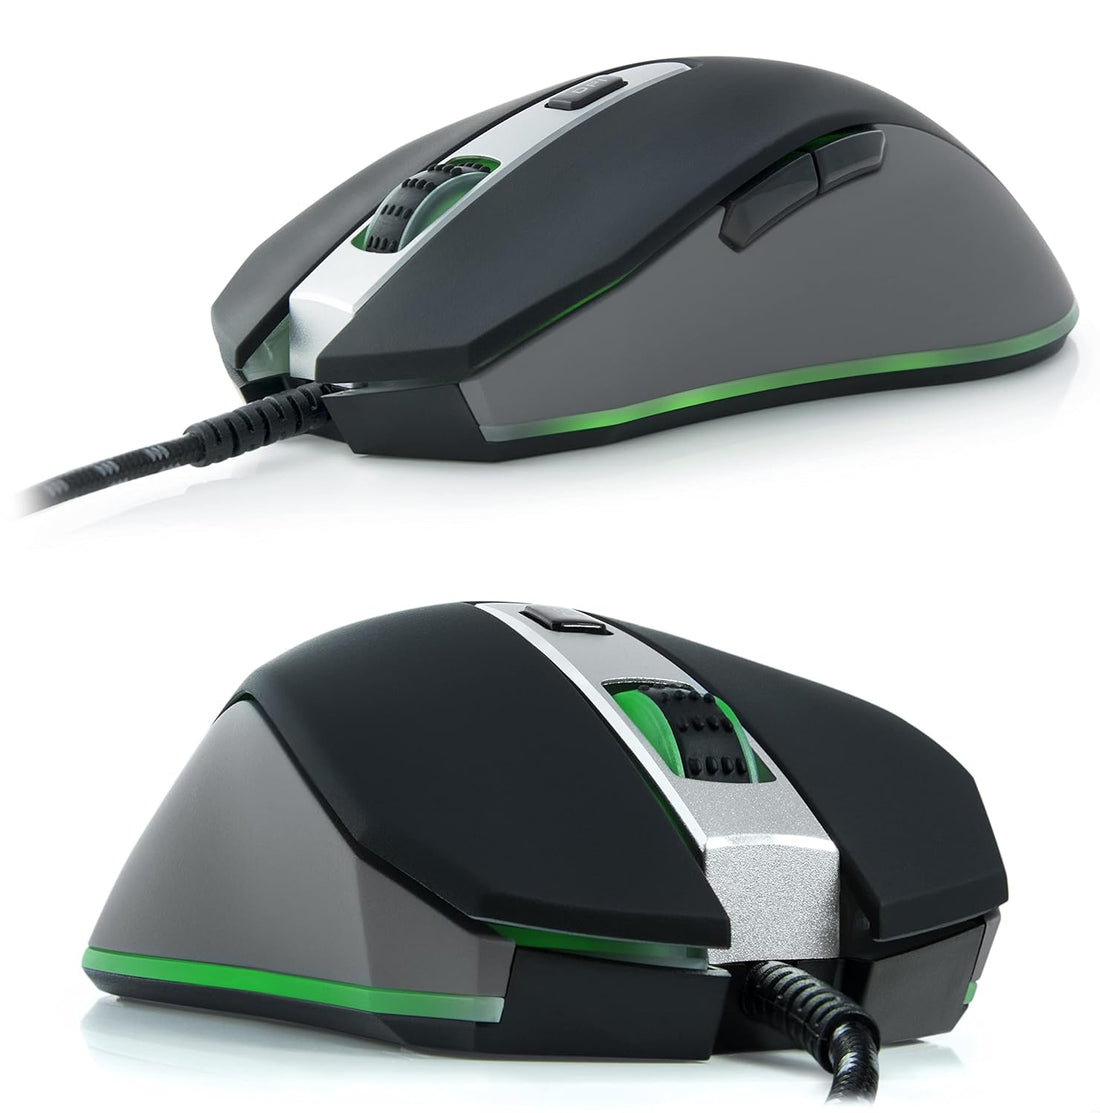 Plugable Performance Mouse with PixArt PMW 3360 Sensor for Gaming and Precision Applications - Compatible with Windows, Mac, and Linux